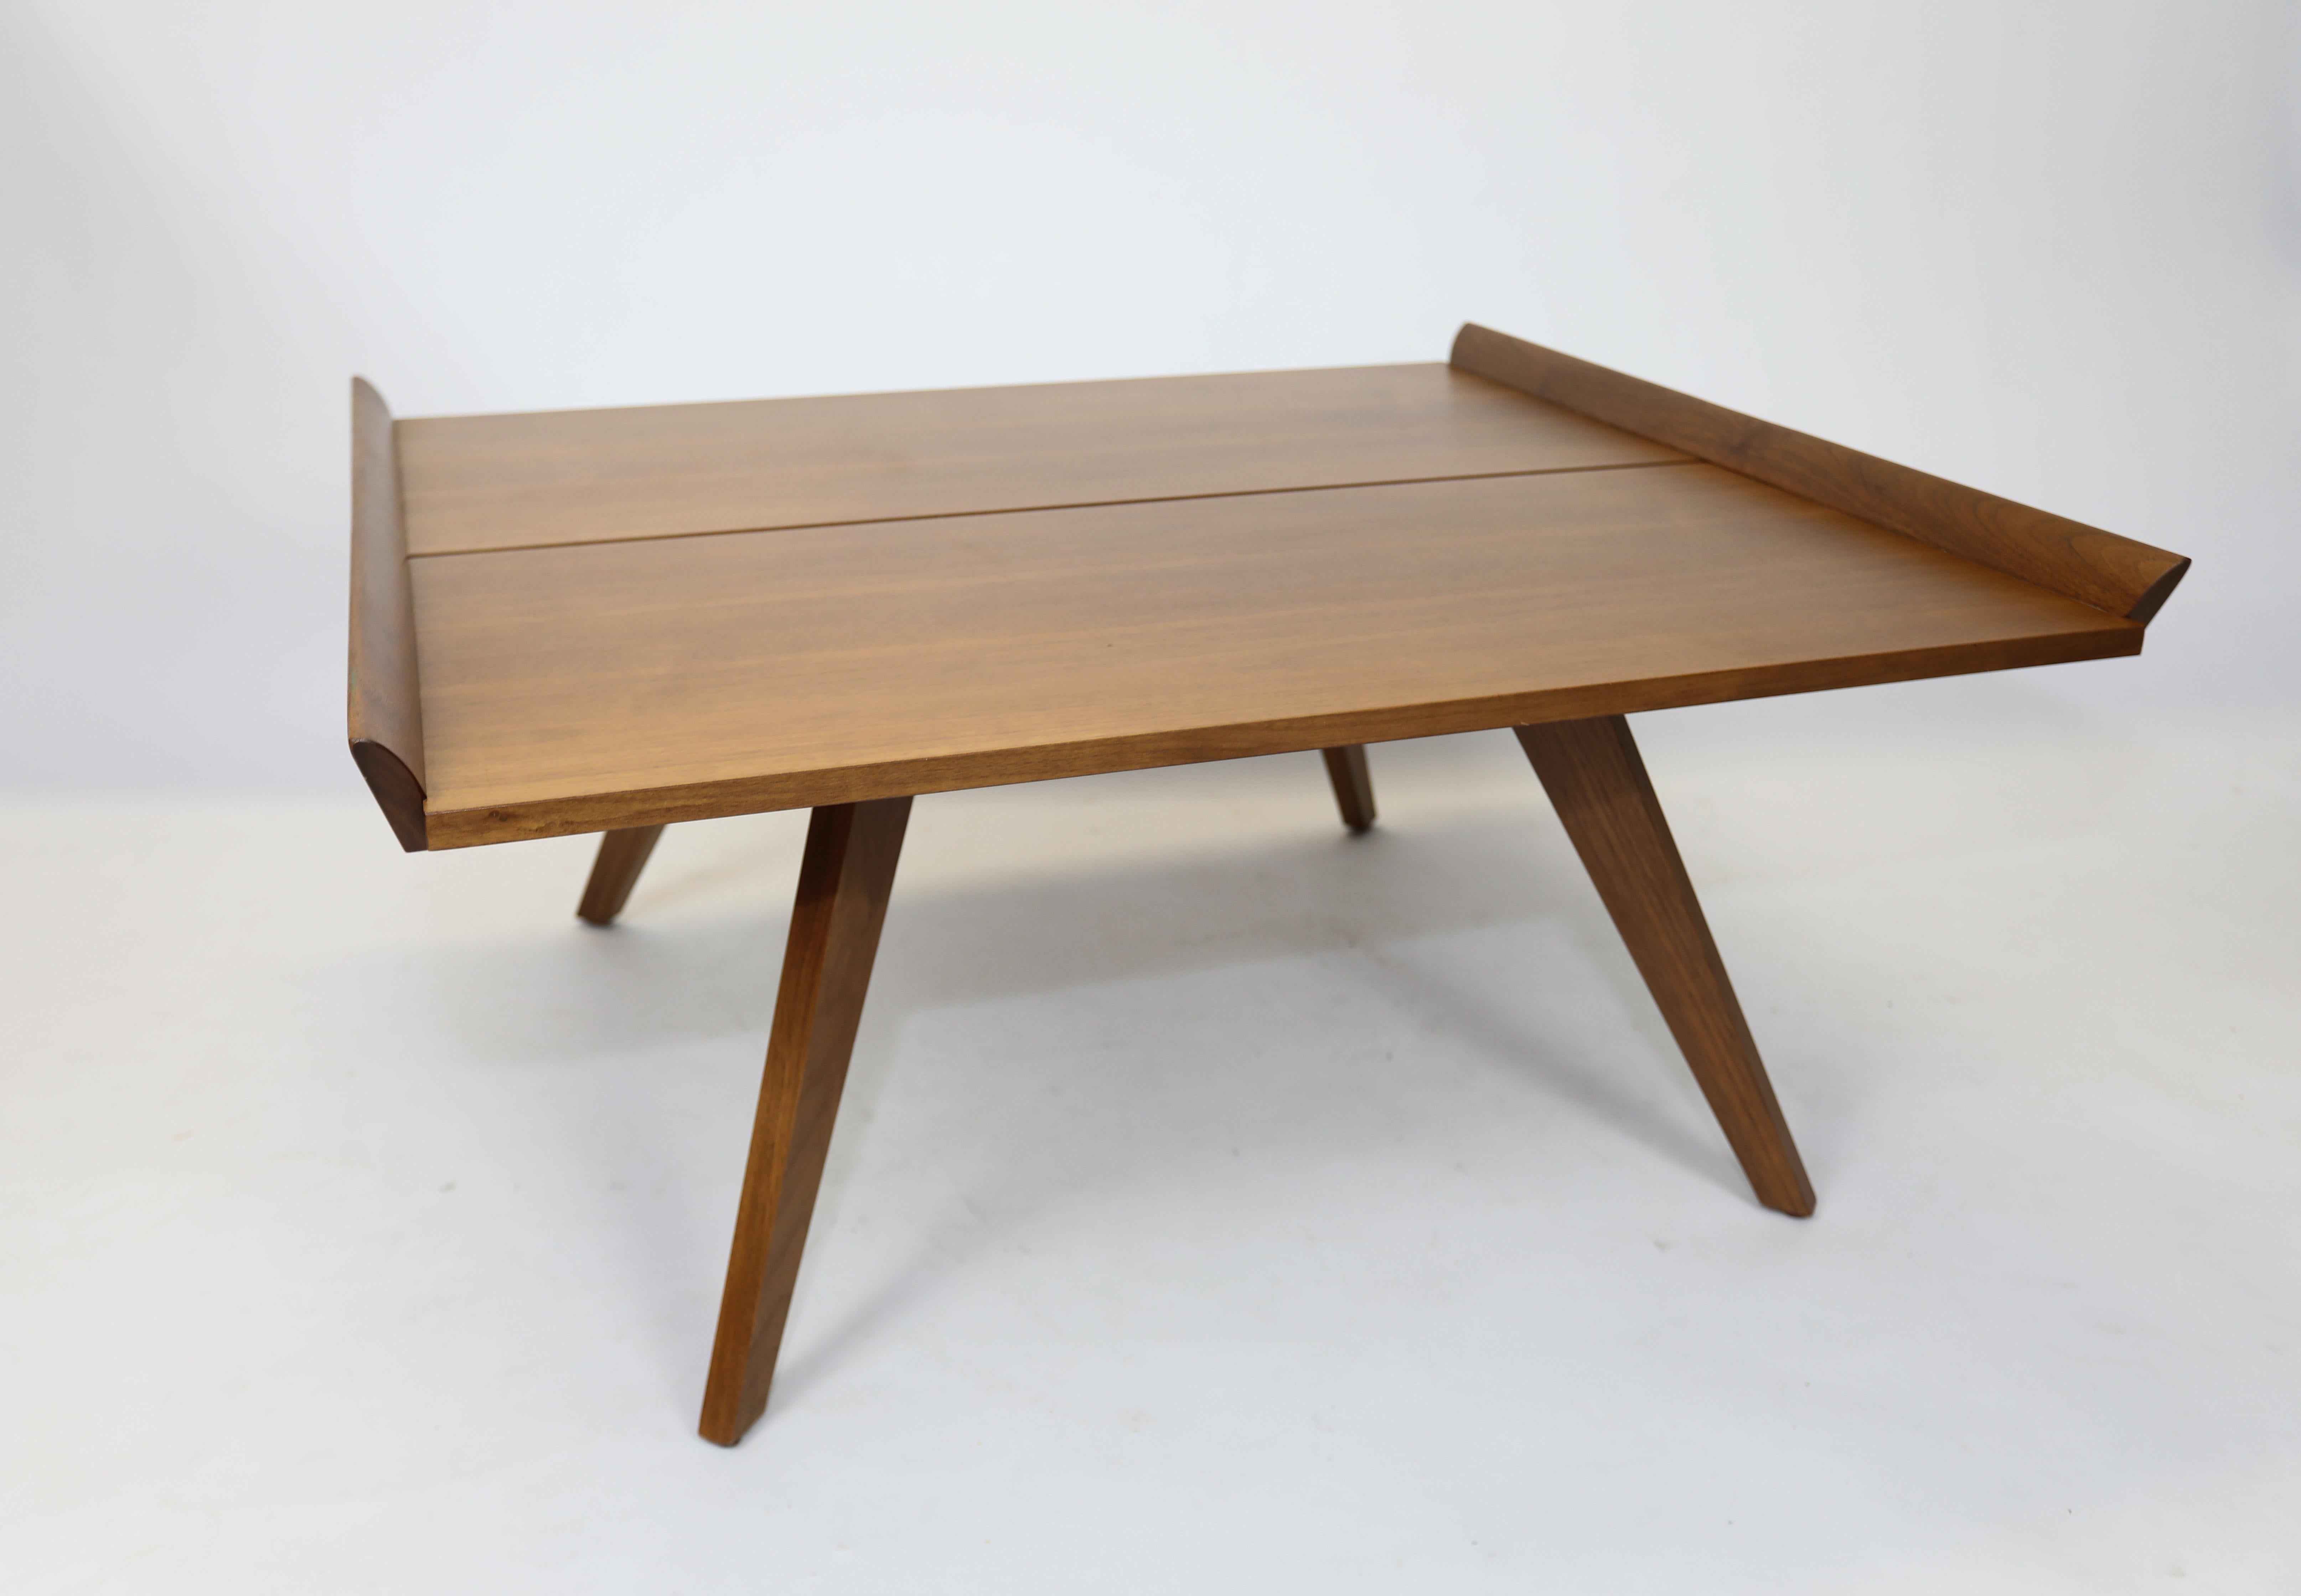 The N-10 table was originally sold by Knoll in the 1940s and discontinued in 1955.
This example is from the re-introduction in 2008.